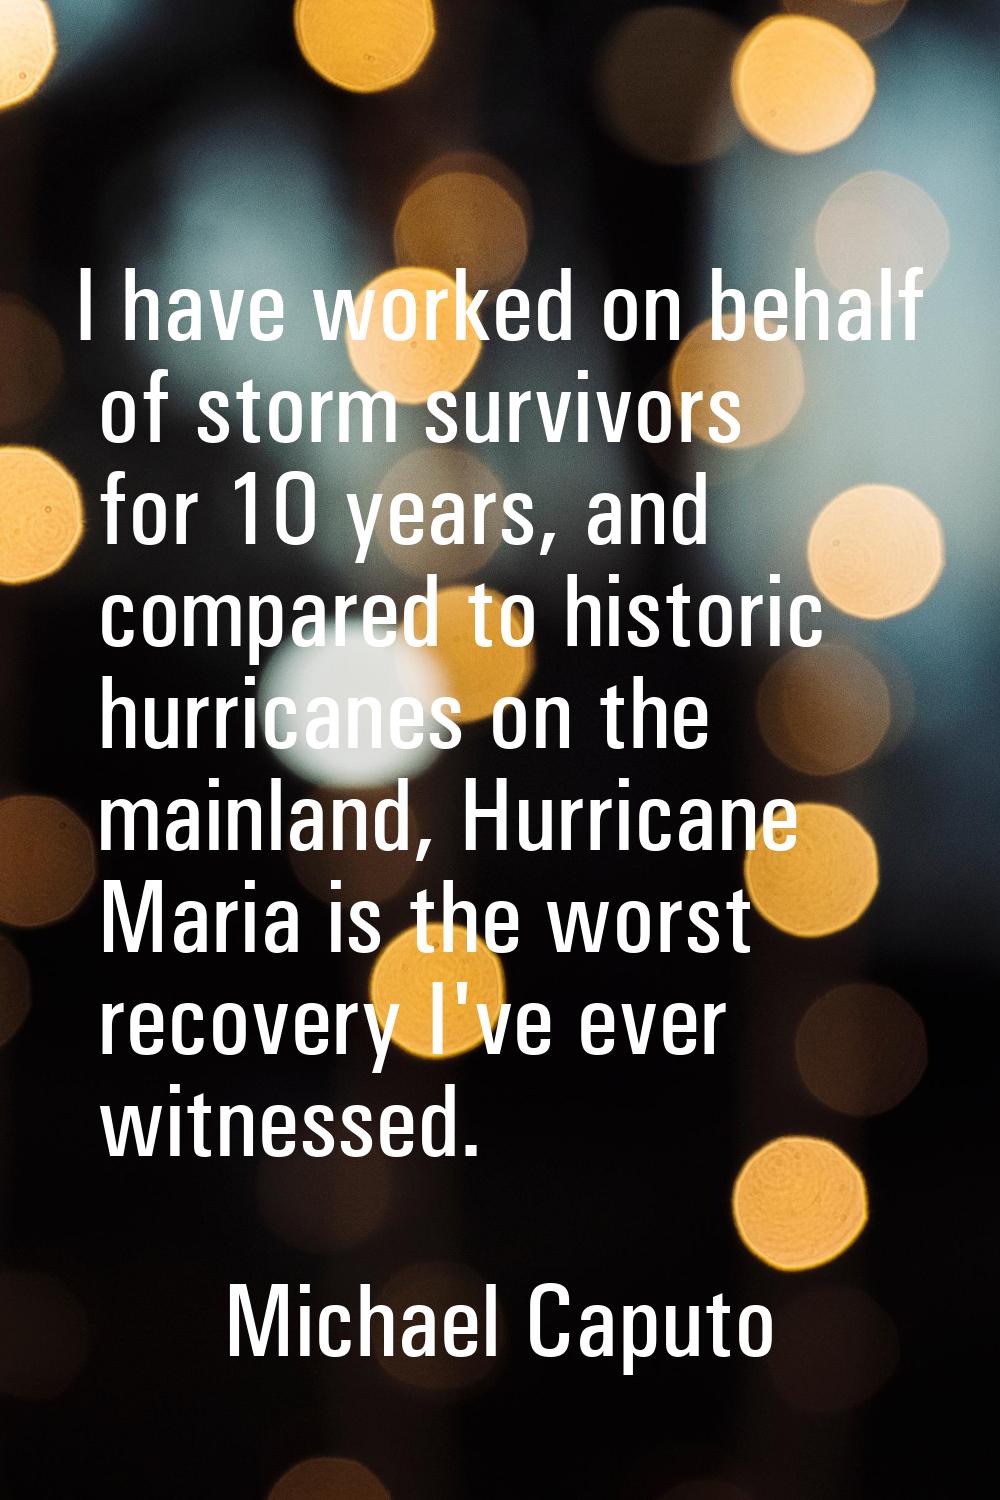 I have worked on behalf of storm survivors for 10 years, and compared to historic hurricanes on the